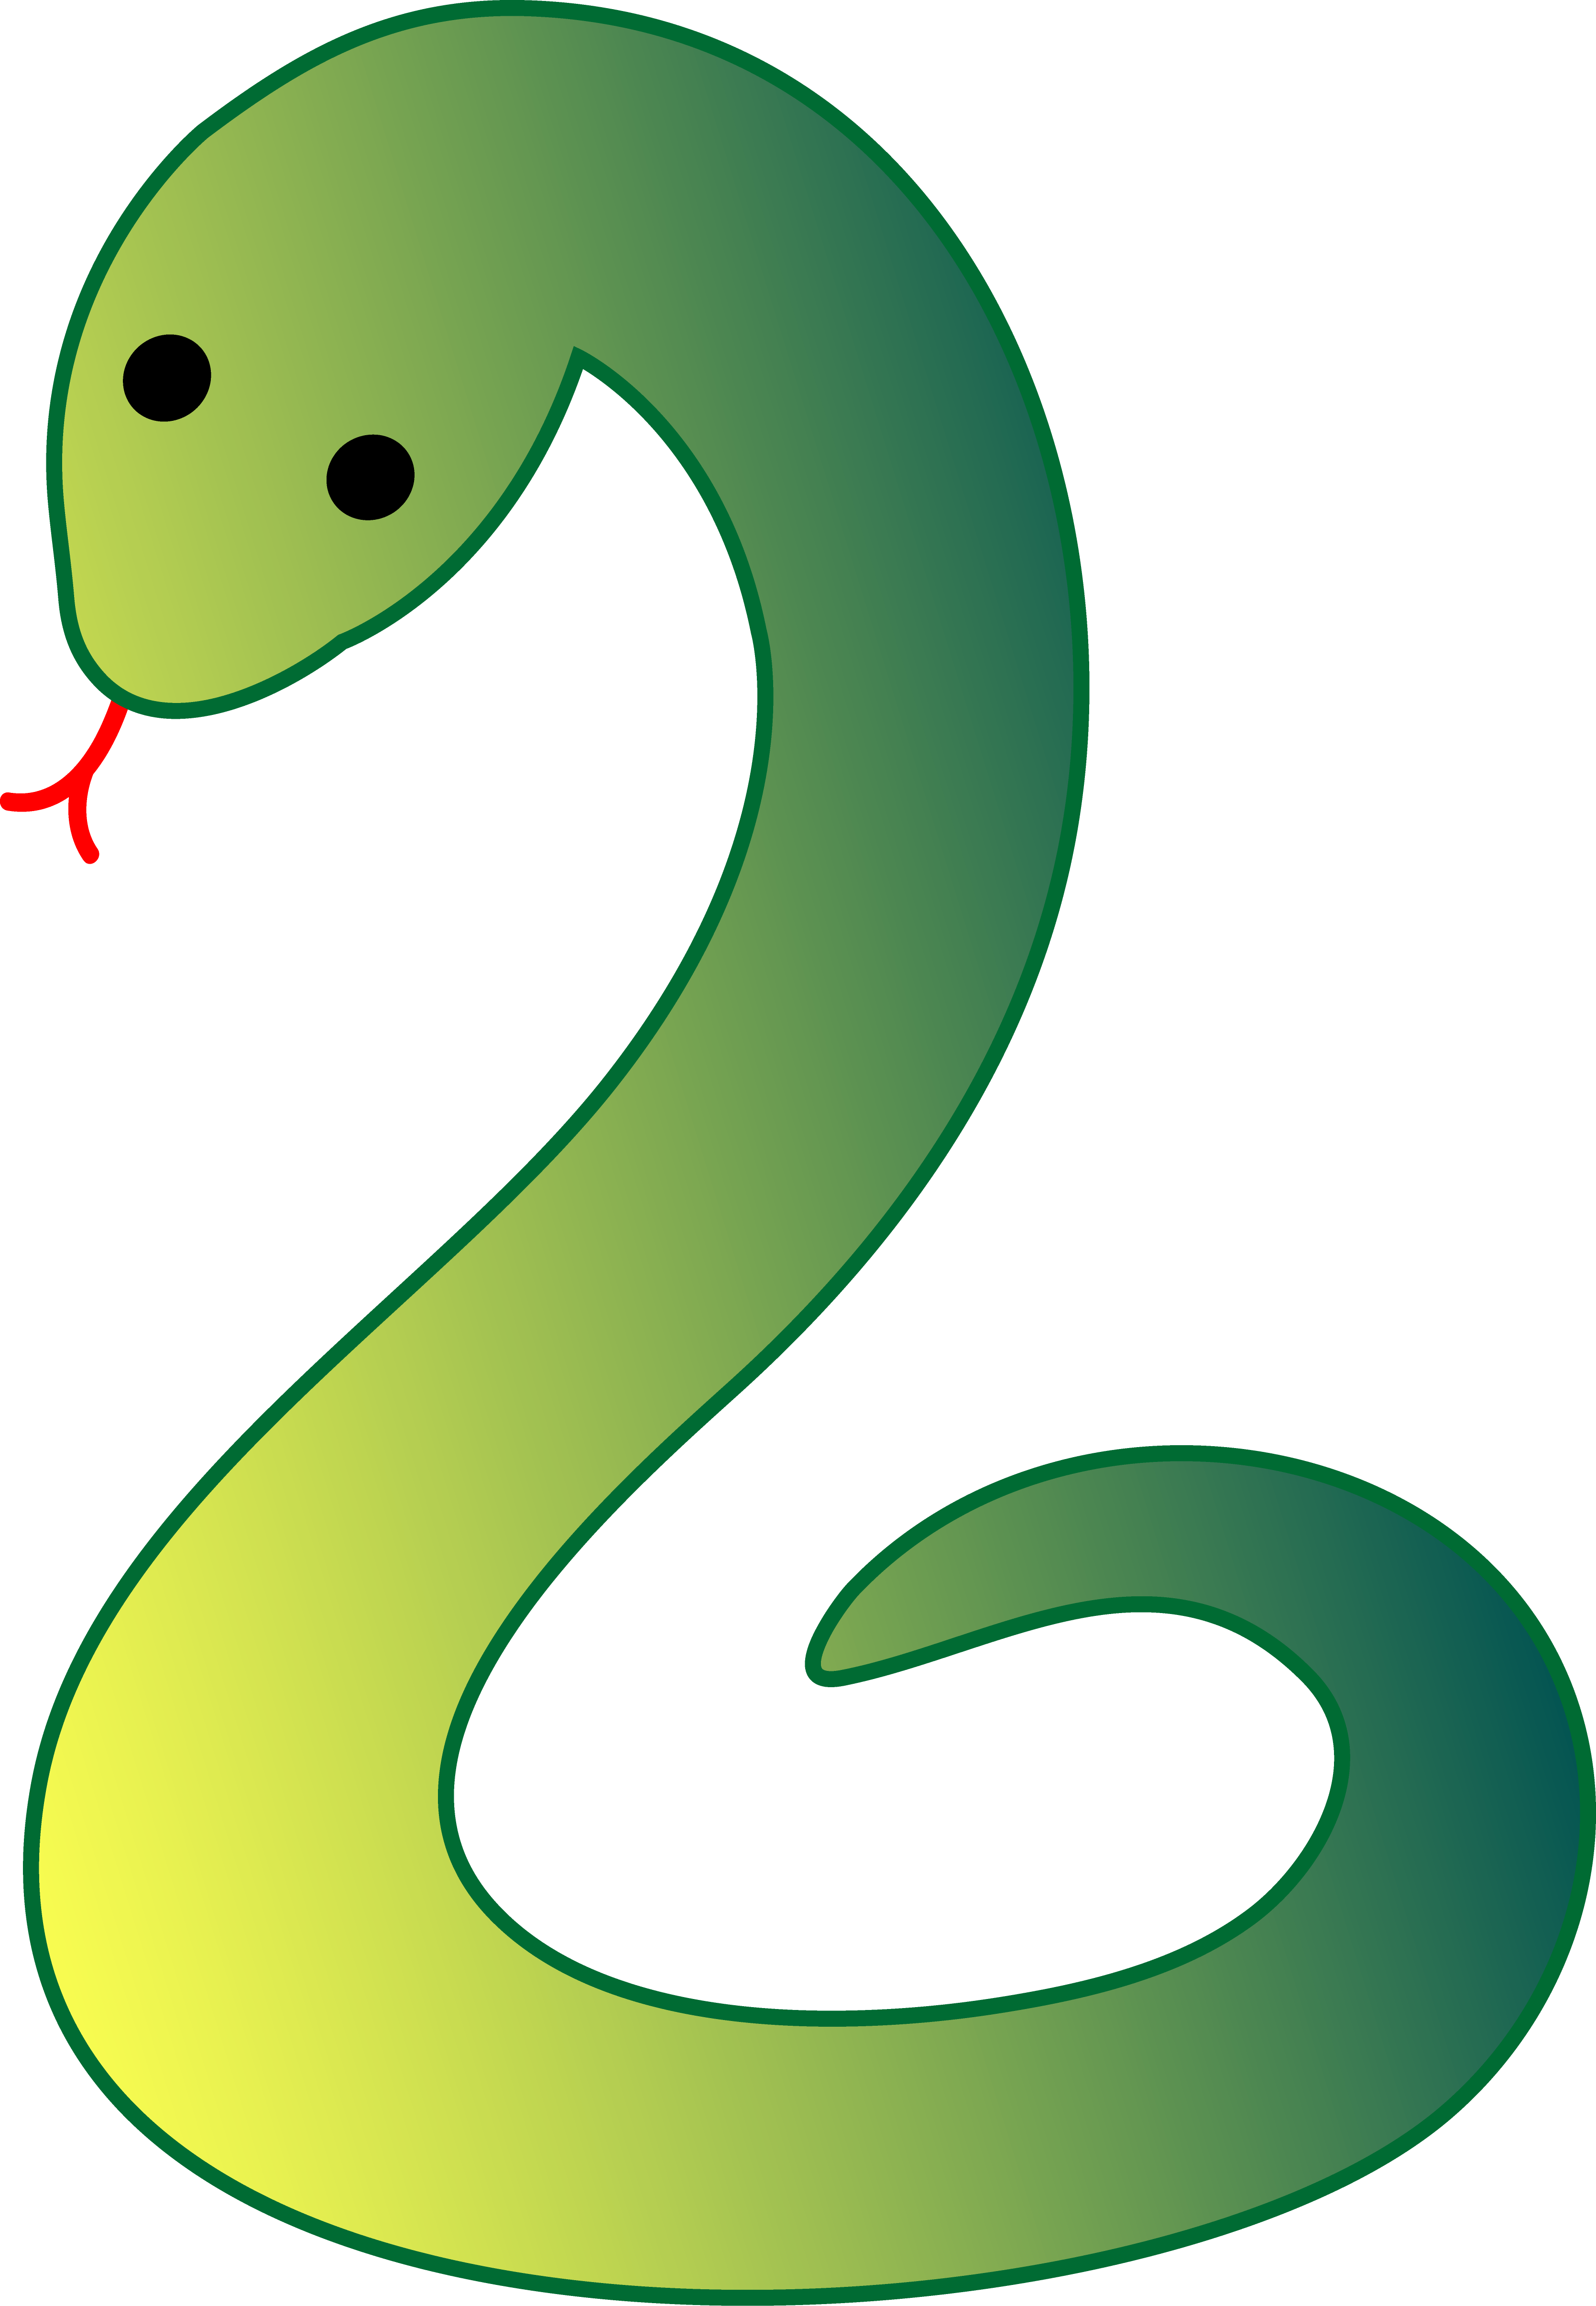 Snake Clip Art Black And White | Clipart Panda - Free Clipart Images